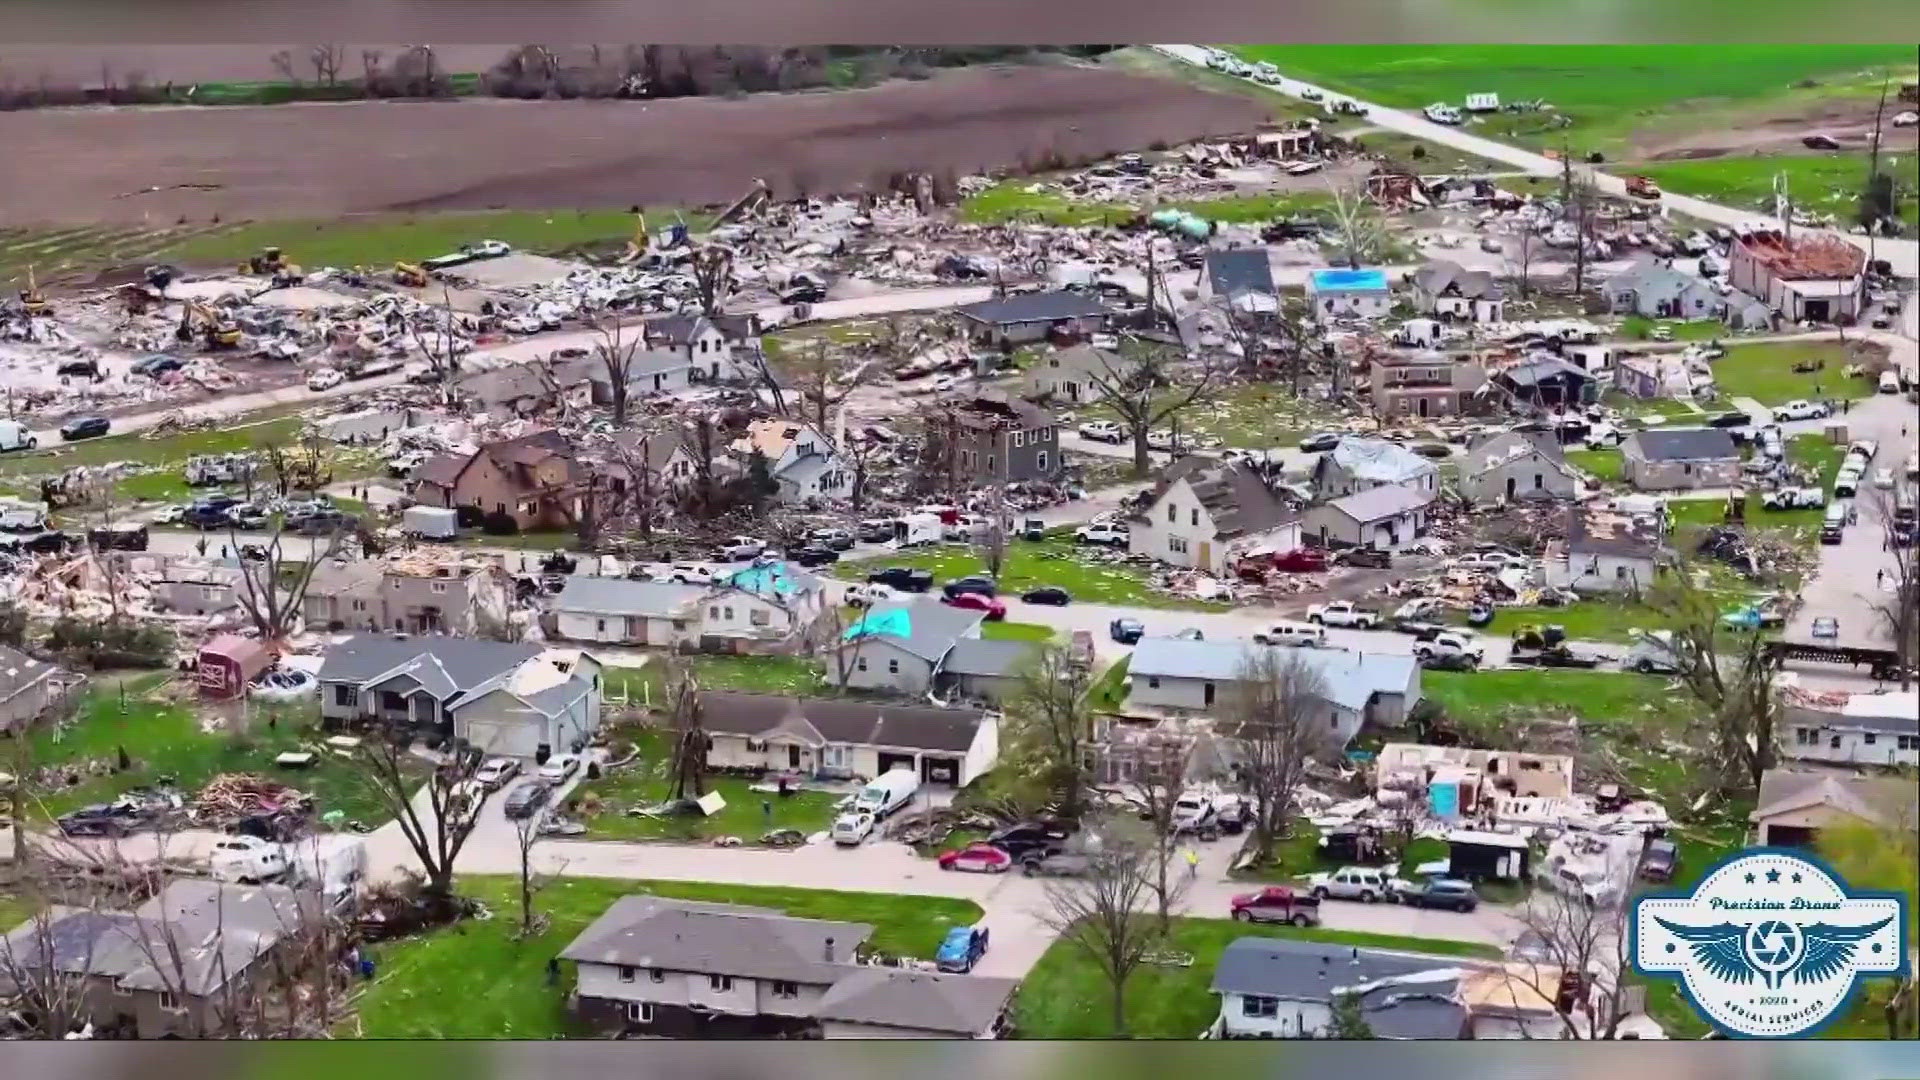 The town of Minden was hit hard and media outlets said half of the town was destroyed and four people were injured.